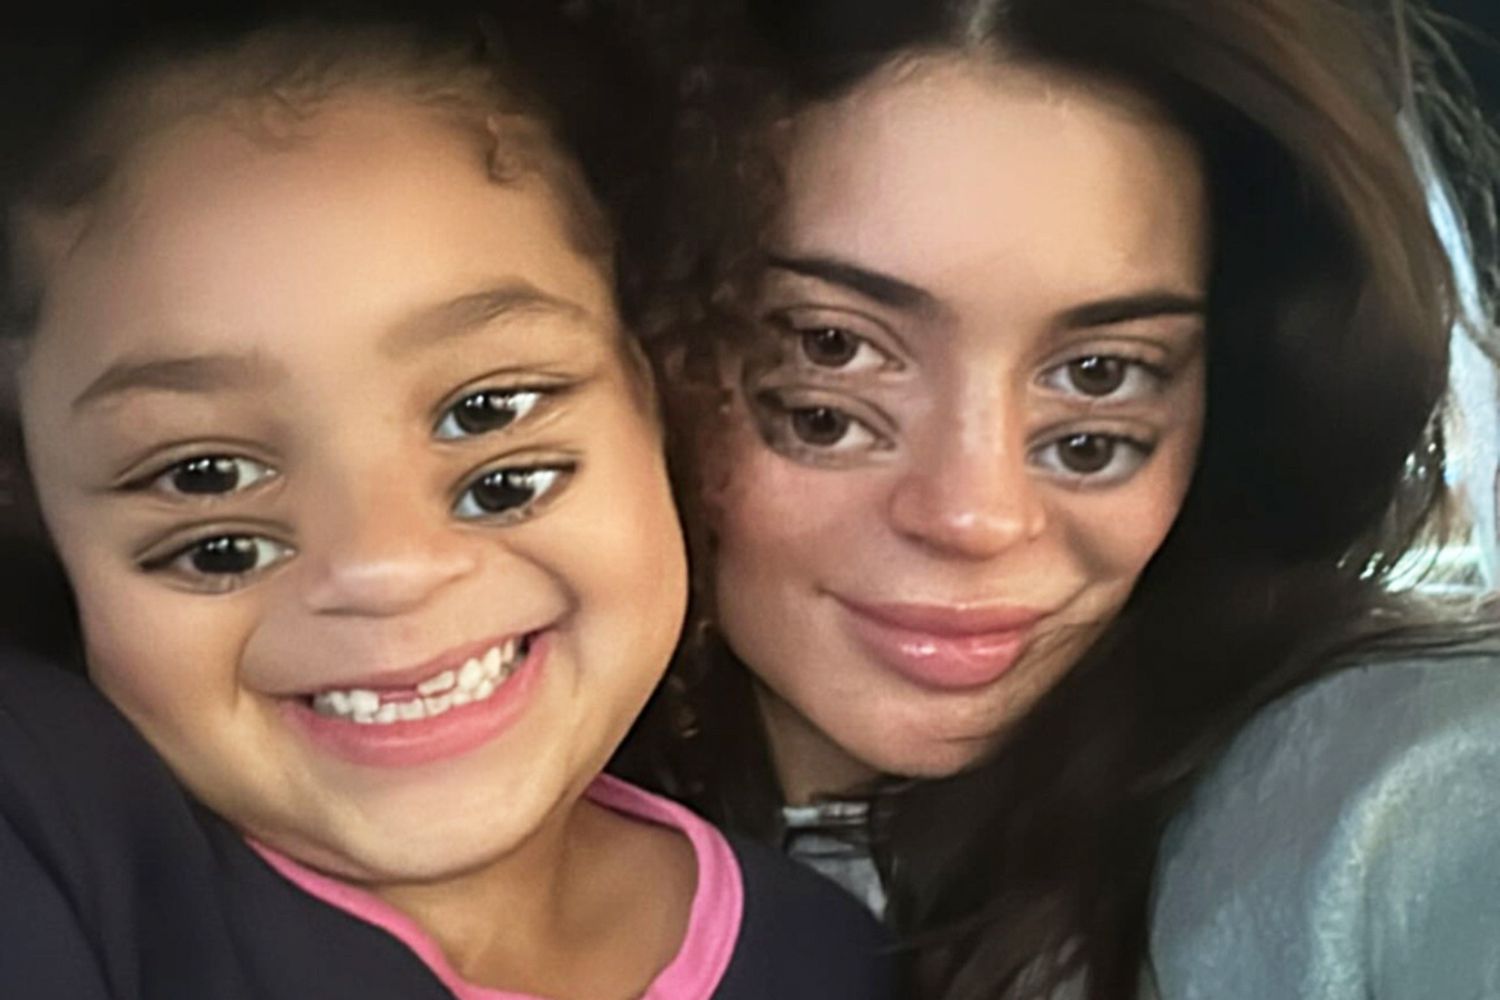 Kylie Jenner selfies with her daughter Stormi